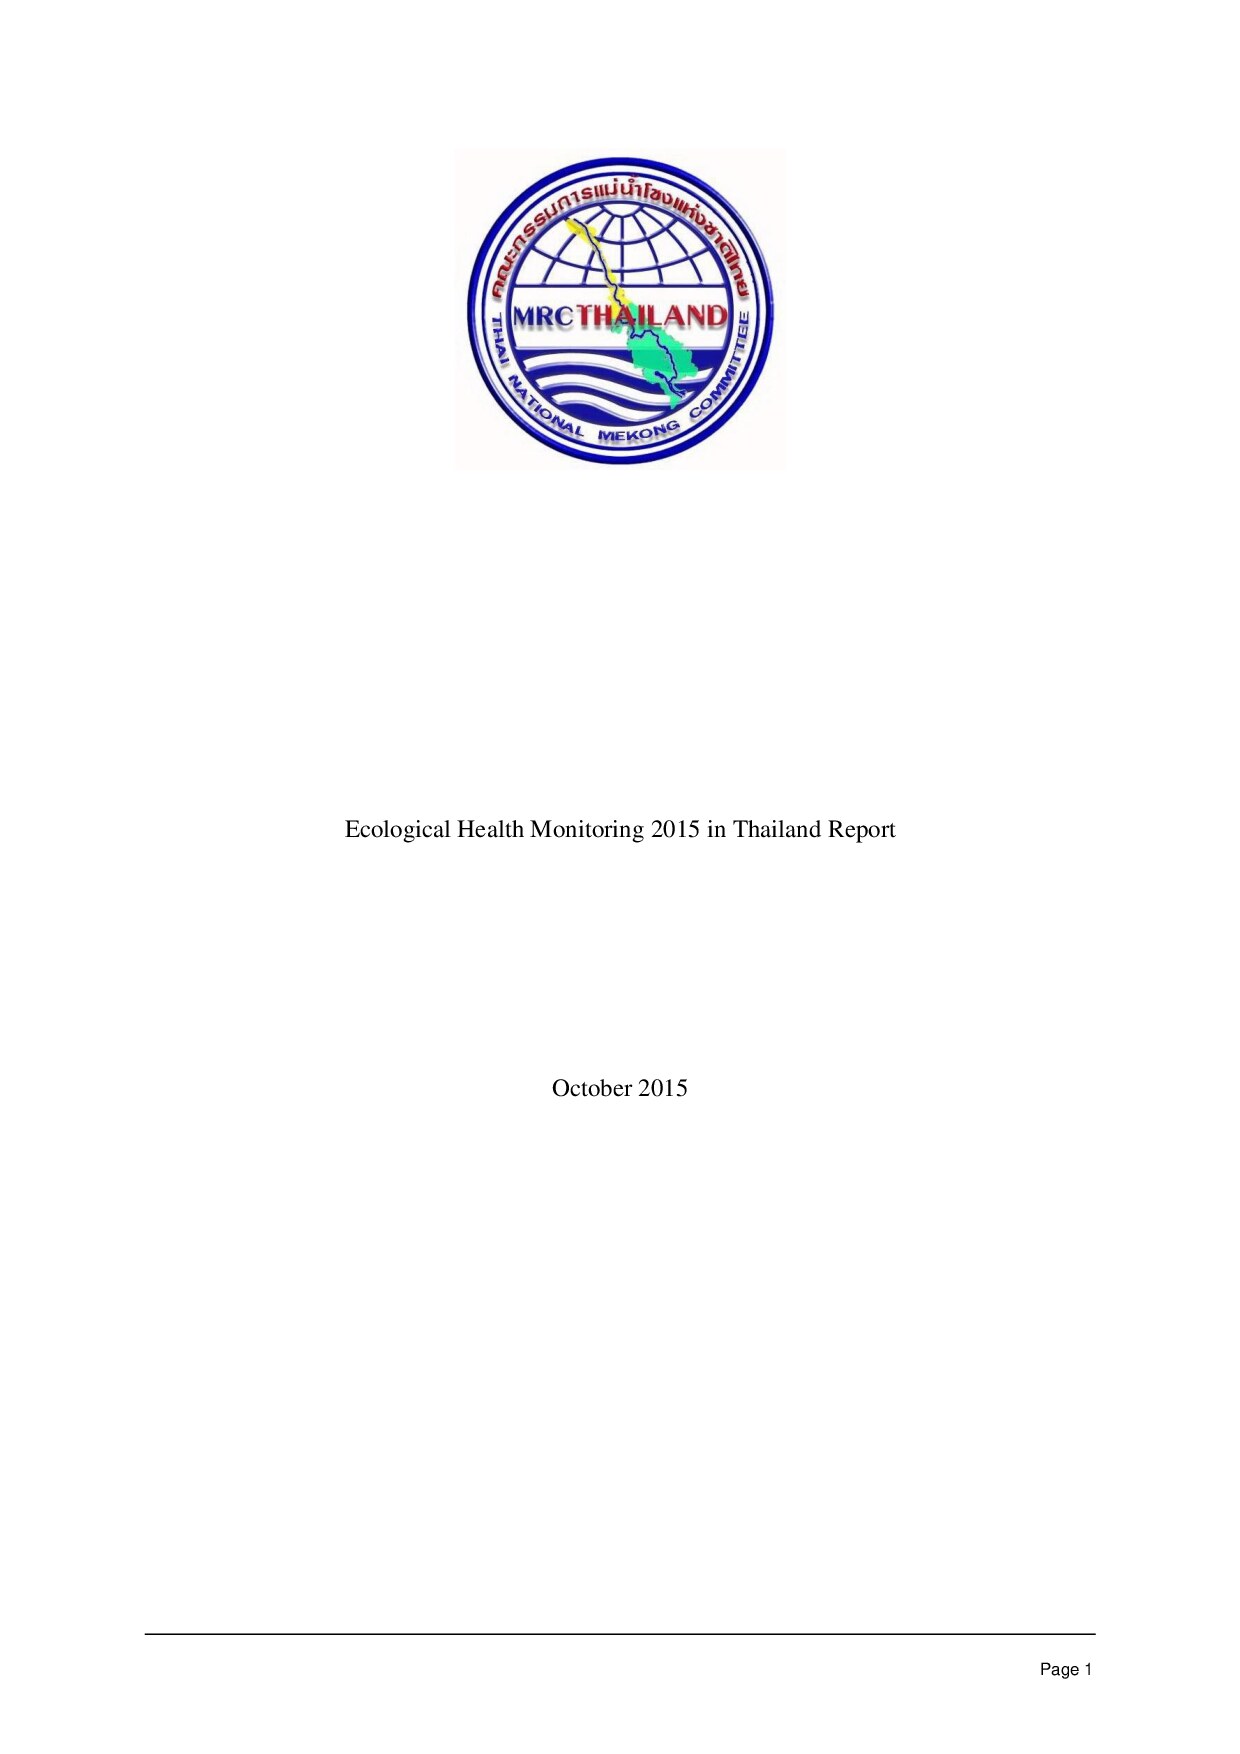 Ecological Health Monitoring 2015 in Thailand Report